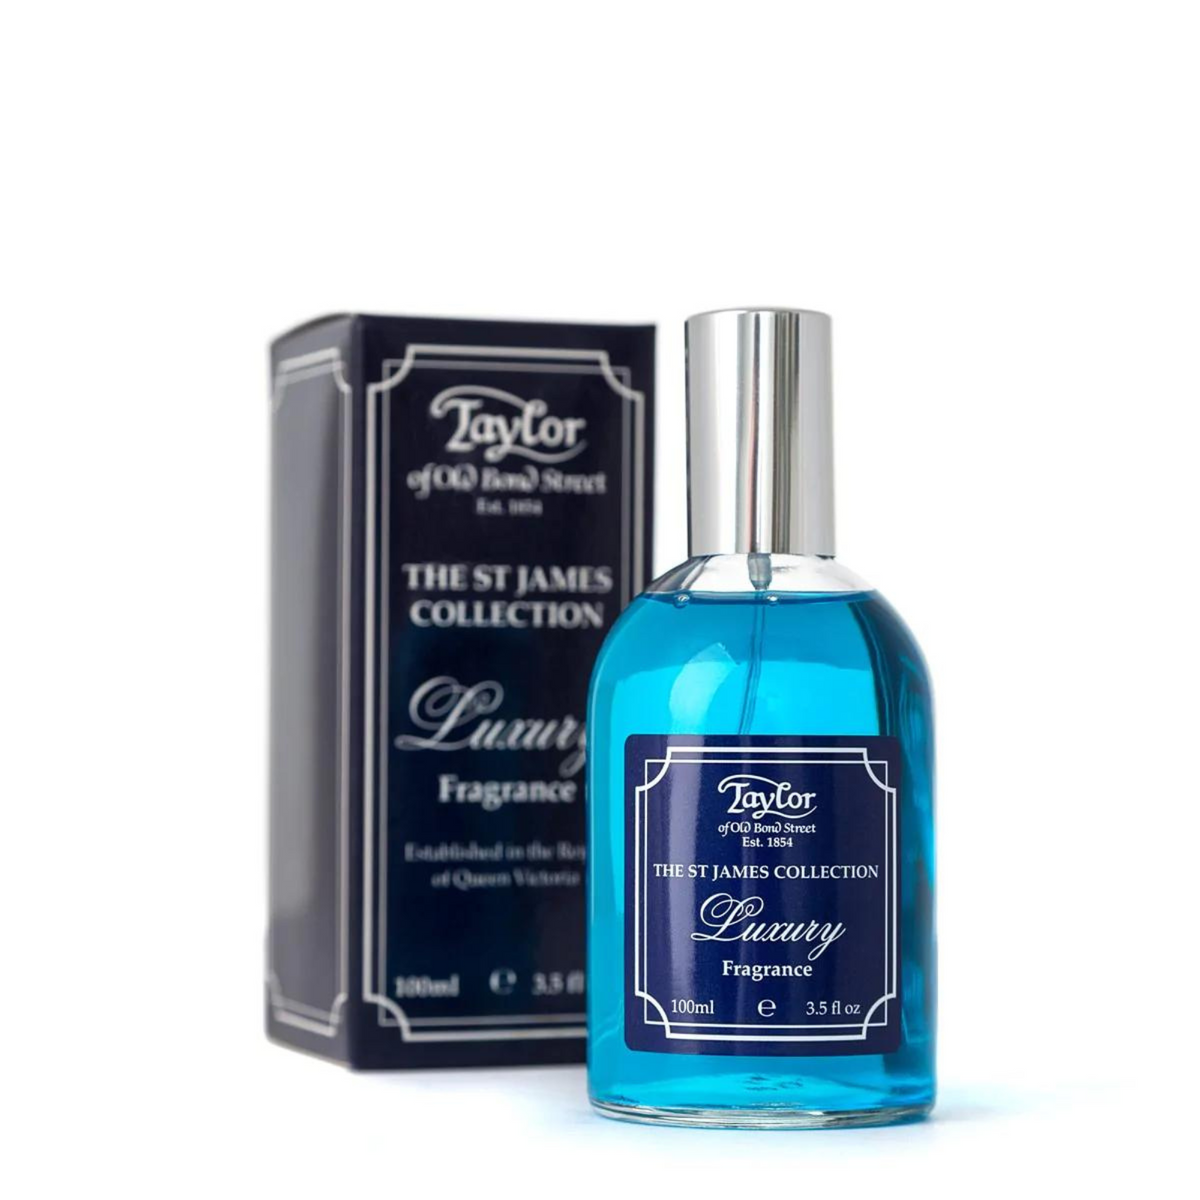 Primary Image of St. James Collection Fragrance